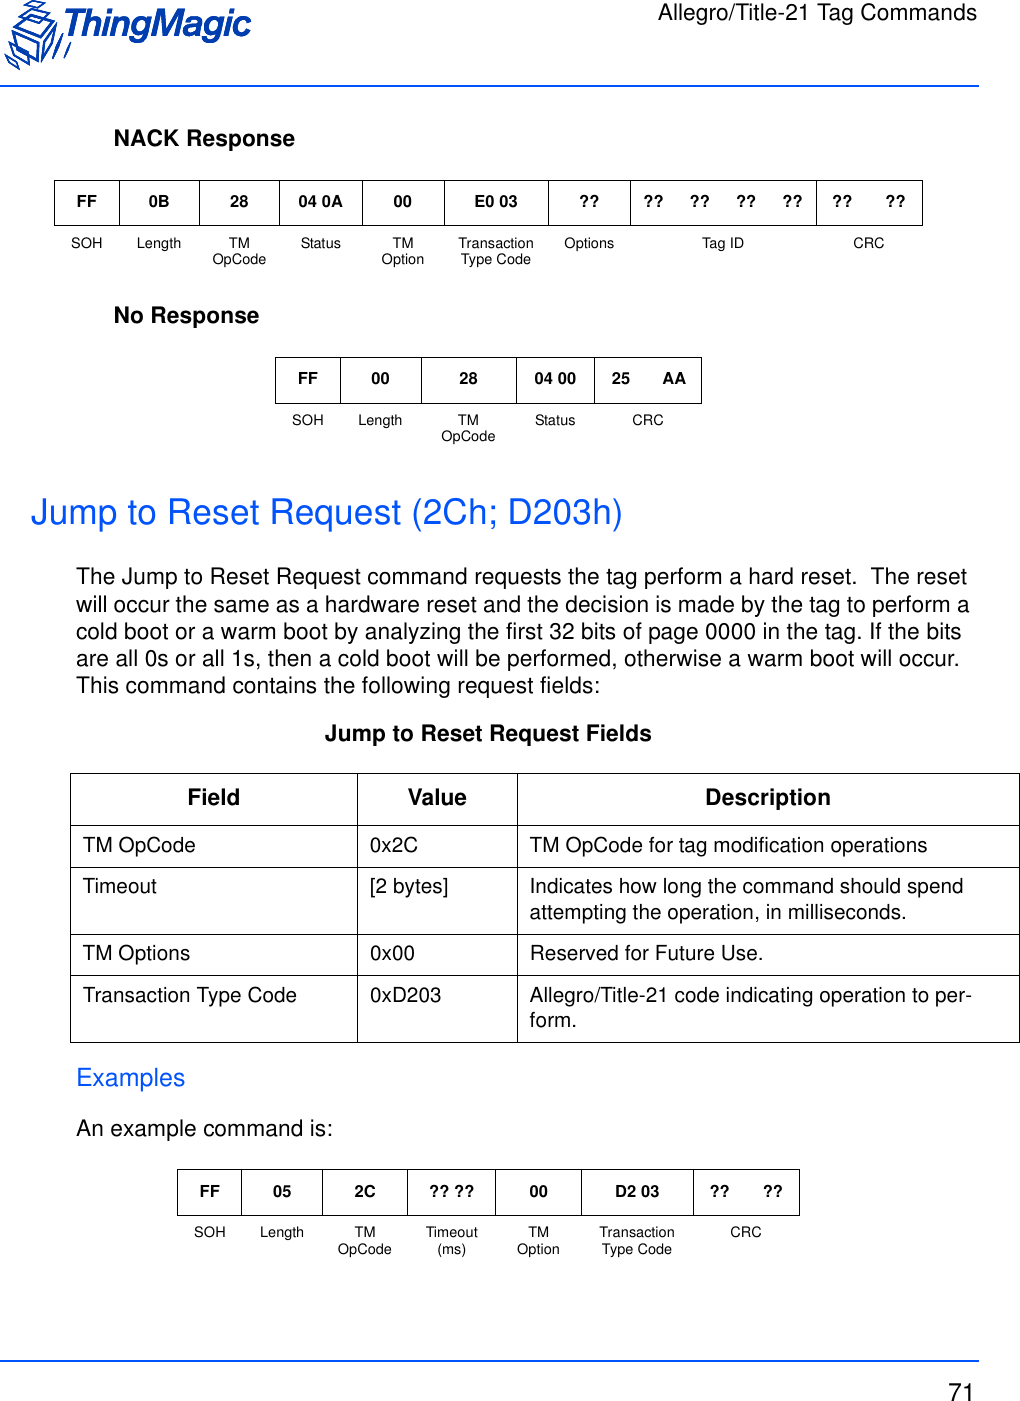 Allegro/Title-21 Tag Commands71NACK ResponseNo ResponseJump to Reset Request (2Ch; D203h)The Jump to Reset Request command requests the tag perform a hard reset.  The reset will occur the same as a hardware reset and the decision is made by the tag to perform a cold boot or a warm boot by analyzing the first 32 bits of page 0000 in the tag. If the bits are all 0s or all 1s, then a cold boot will be performed, otherwise a warm boot will occur. This command contains the following request fields:Jump to Reset Request FieldsExamplesAn example command is:FF 0B 28 04 0A 00 E0 03 ?? ?? ?? ?? ?? ?? ??SOH Length TM OpCode Status TM Option Transaction Type Code Options Tag ID CRCFF 00 28 04 00 25 AASOH Length TM OpCode Status CRCField Value DescriptionTM OpCode 0x2C TM OpCode for tag modification operationsTimeout [2 bytes] Indicates how long the command should spend attempting the operation, in milliseconds.TM Options 0x00 Reserved for Future Use. Transaction Type Code 0xD203 Allegro/Title-21 code indicating operation to per-form.FF 05 2C ?? ?? 00 D2 03 ?? ??SOH Length TM OpCode Timeout (ms) TM Option Transaction Type Code CRC